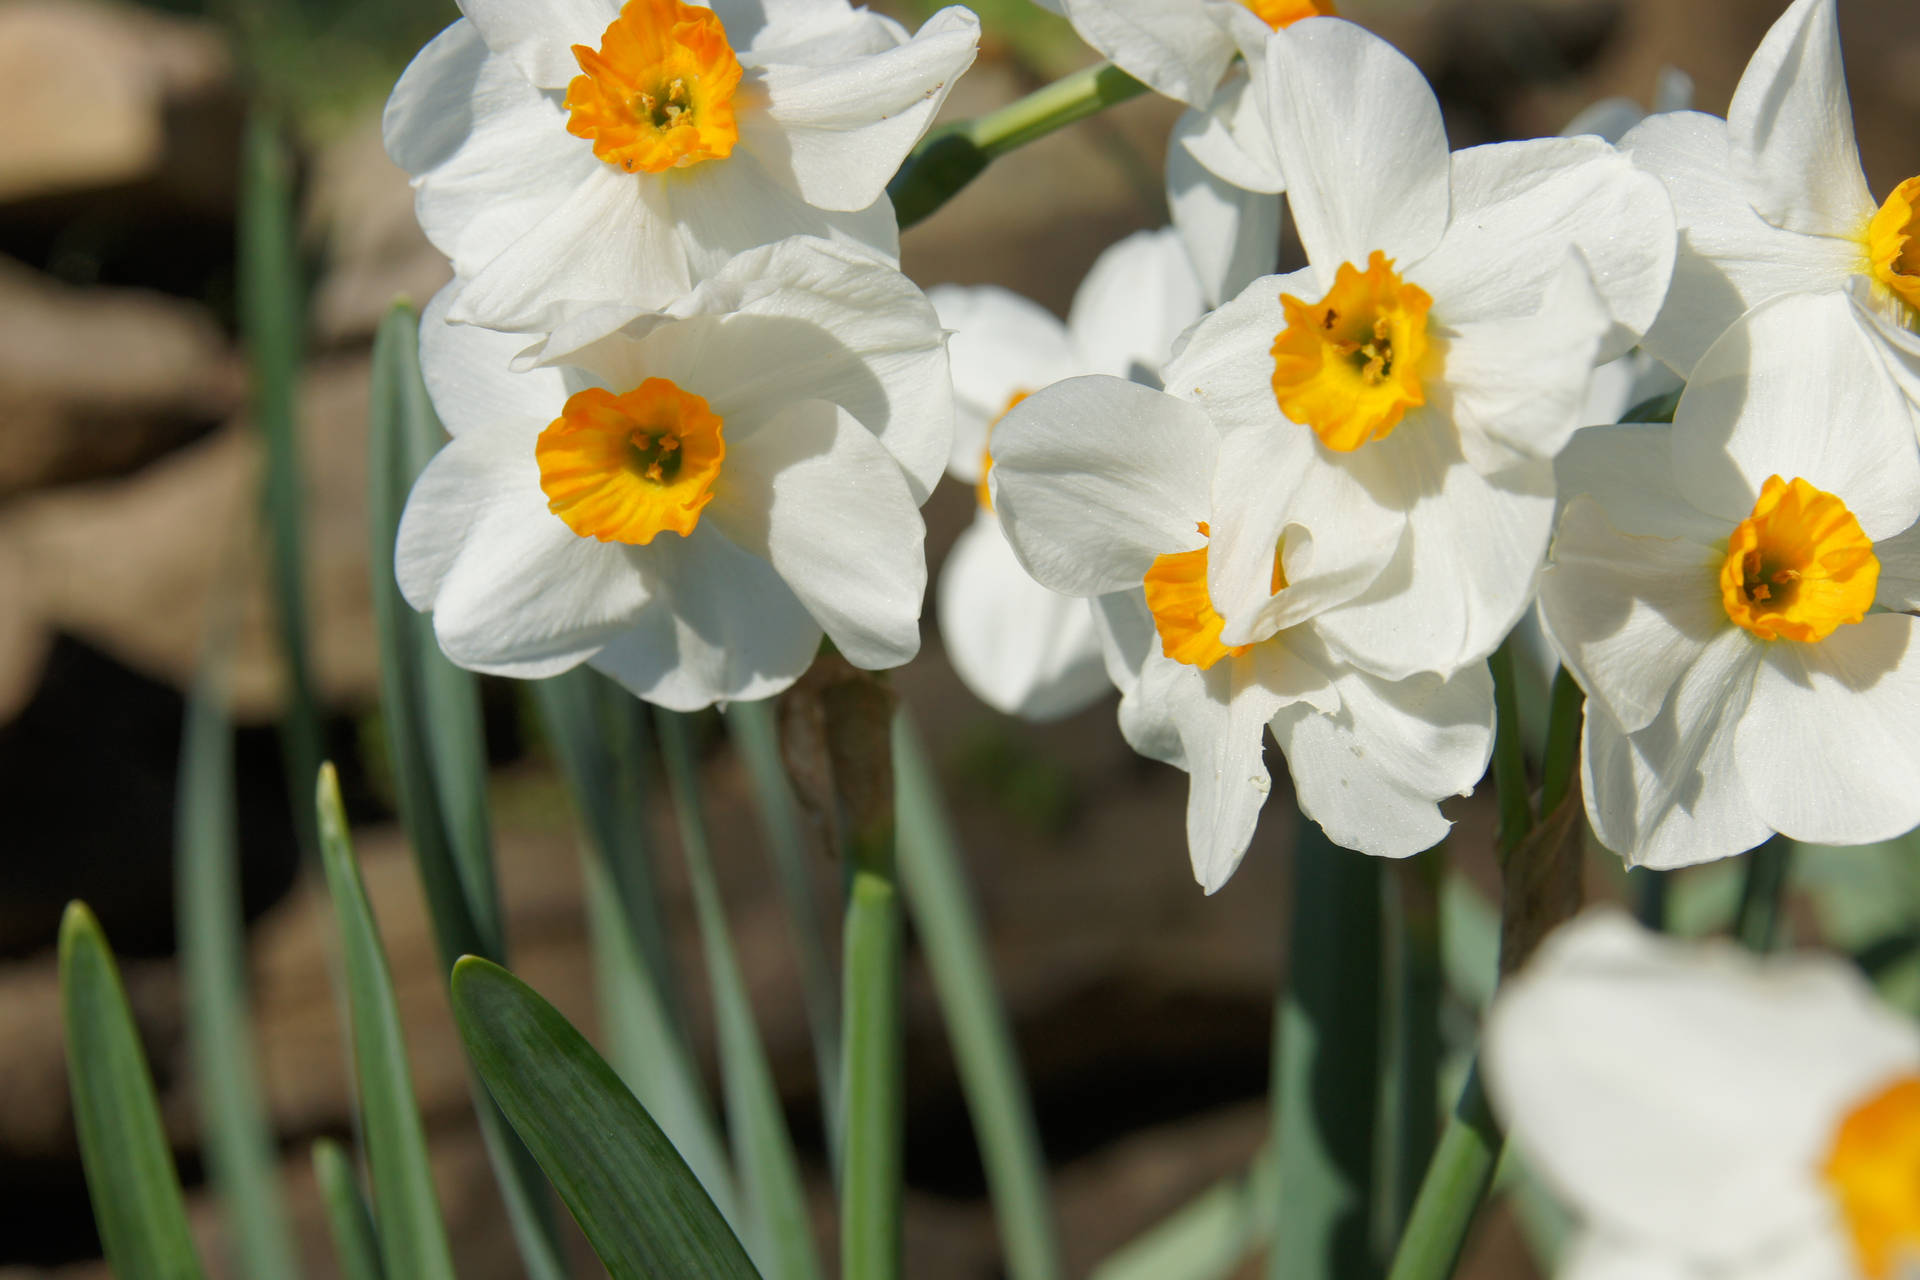 Daffodil 4272X2848 Wallpaper and Background Image